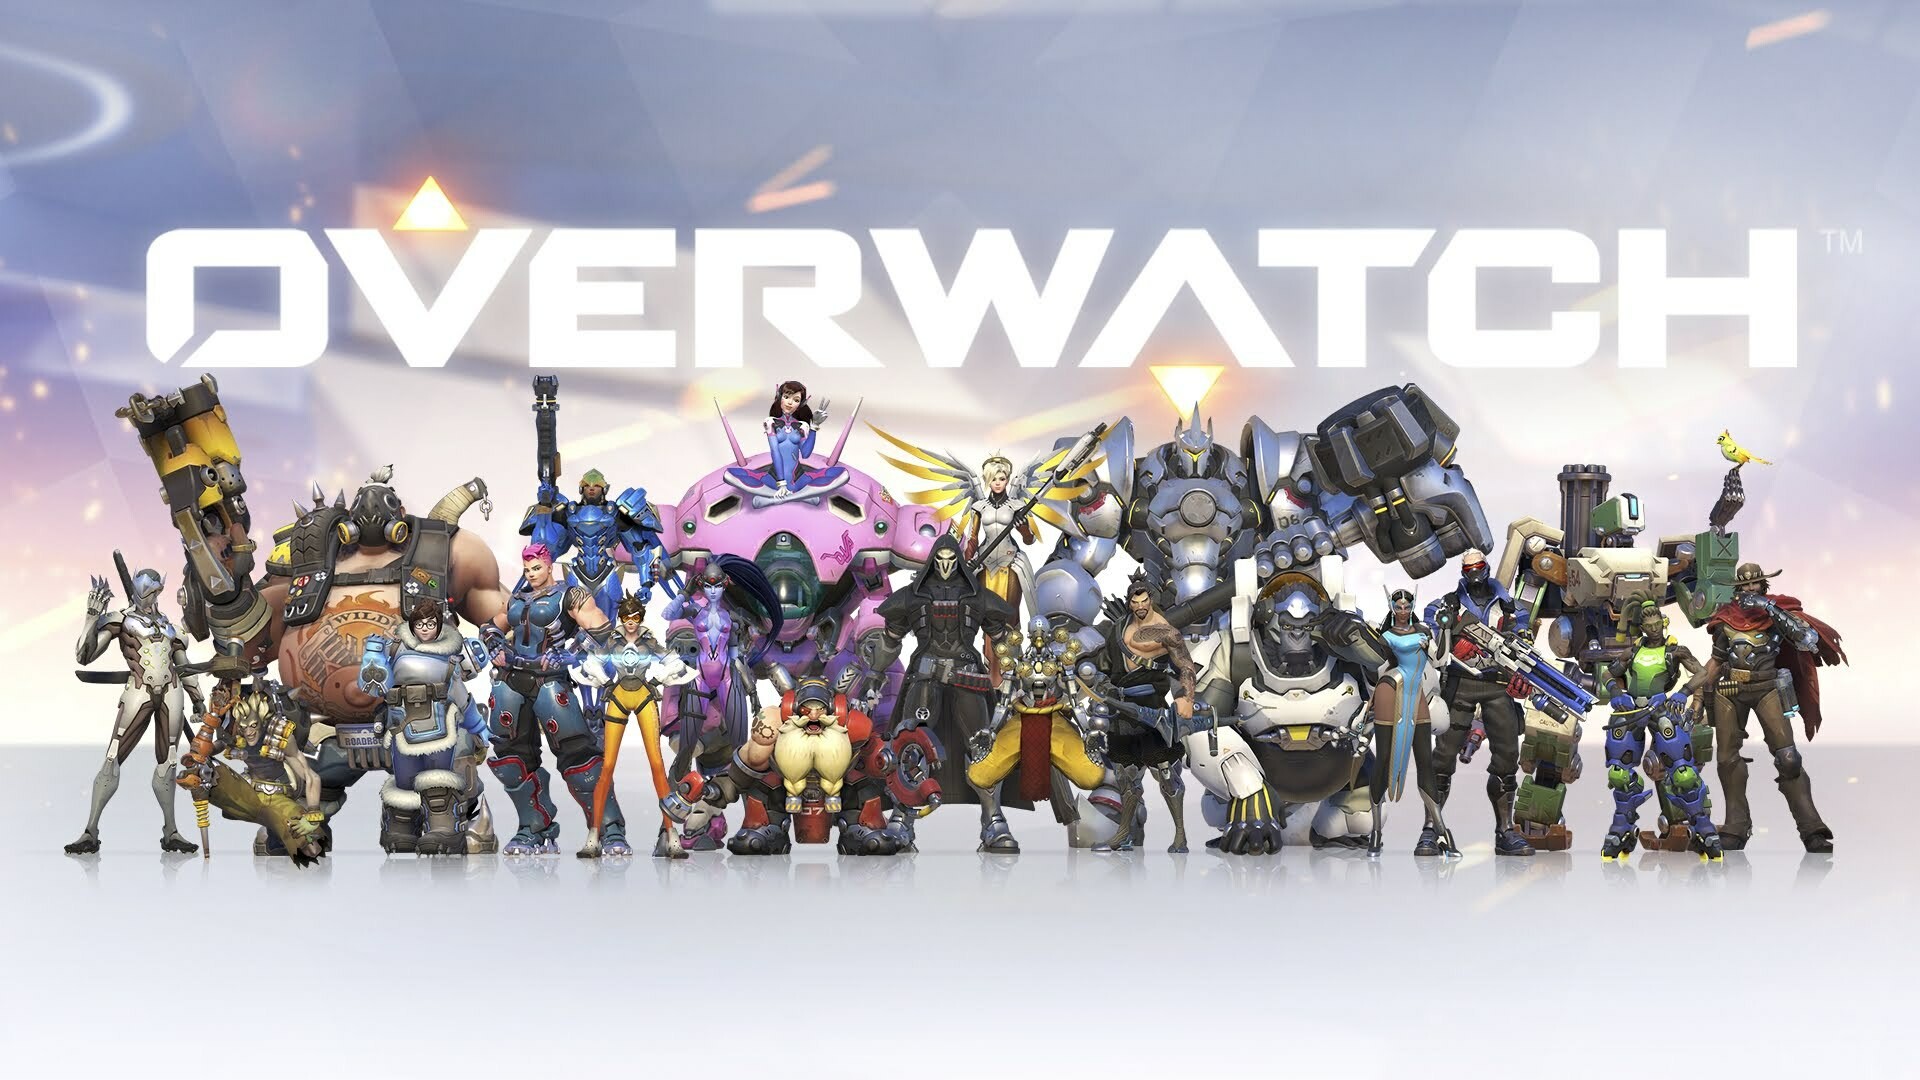 Overwatch: Two teams of six players, Game servers are hosted by Blizzard. 1920x1080 Full HD Wallpaper.